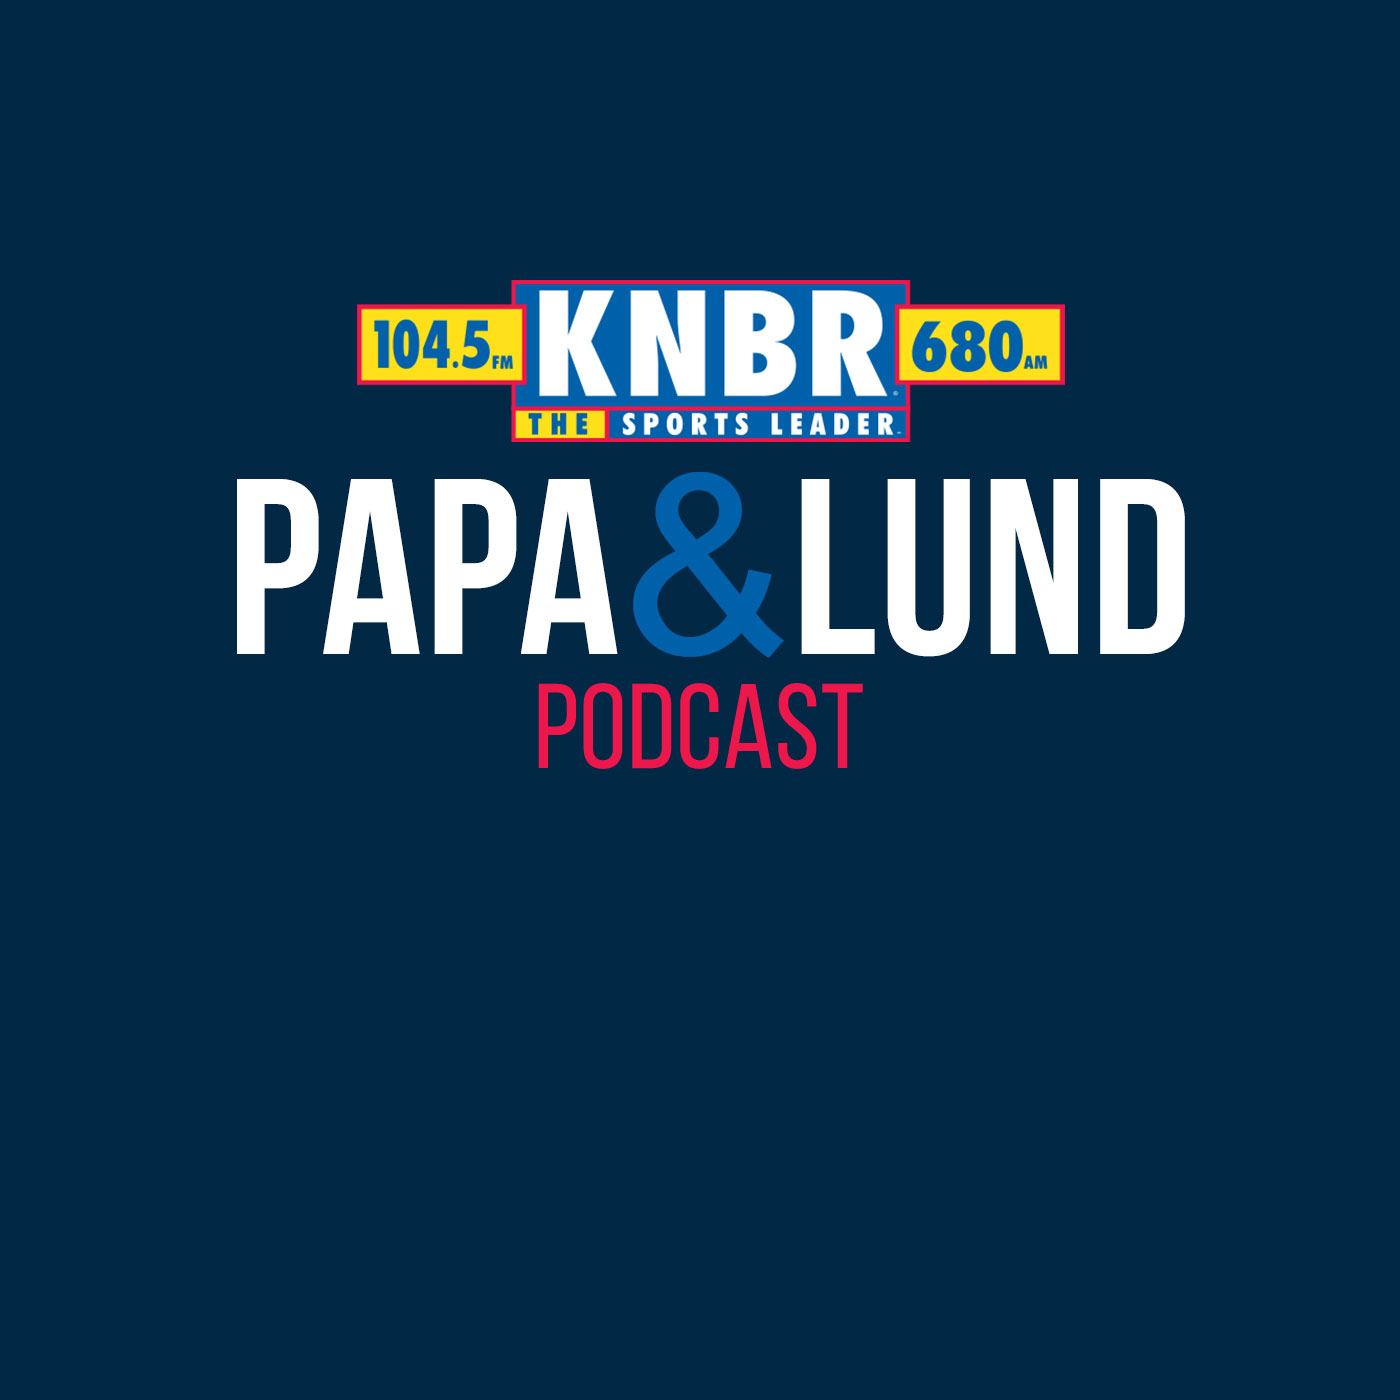 12-03 Tim Kurkjian joins Papa & Copes to give some insight on the MLB lockout and gives his own predication when the lockout will be over